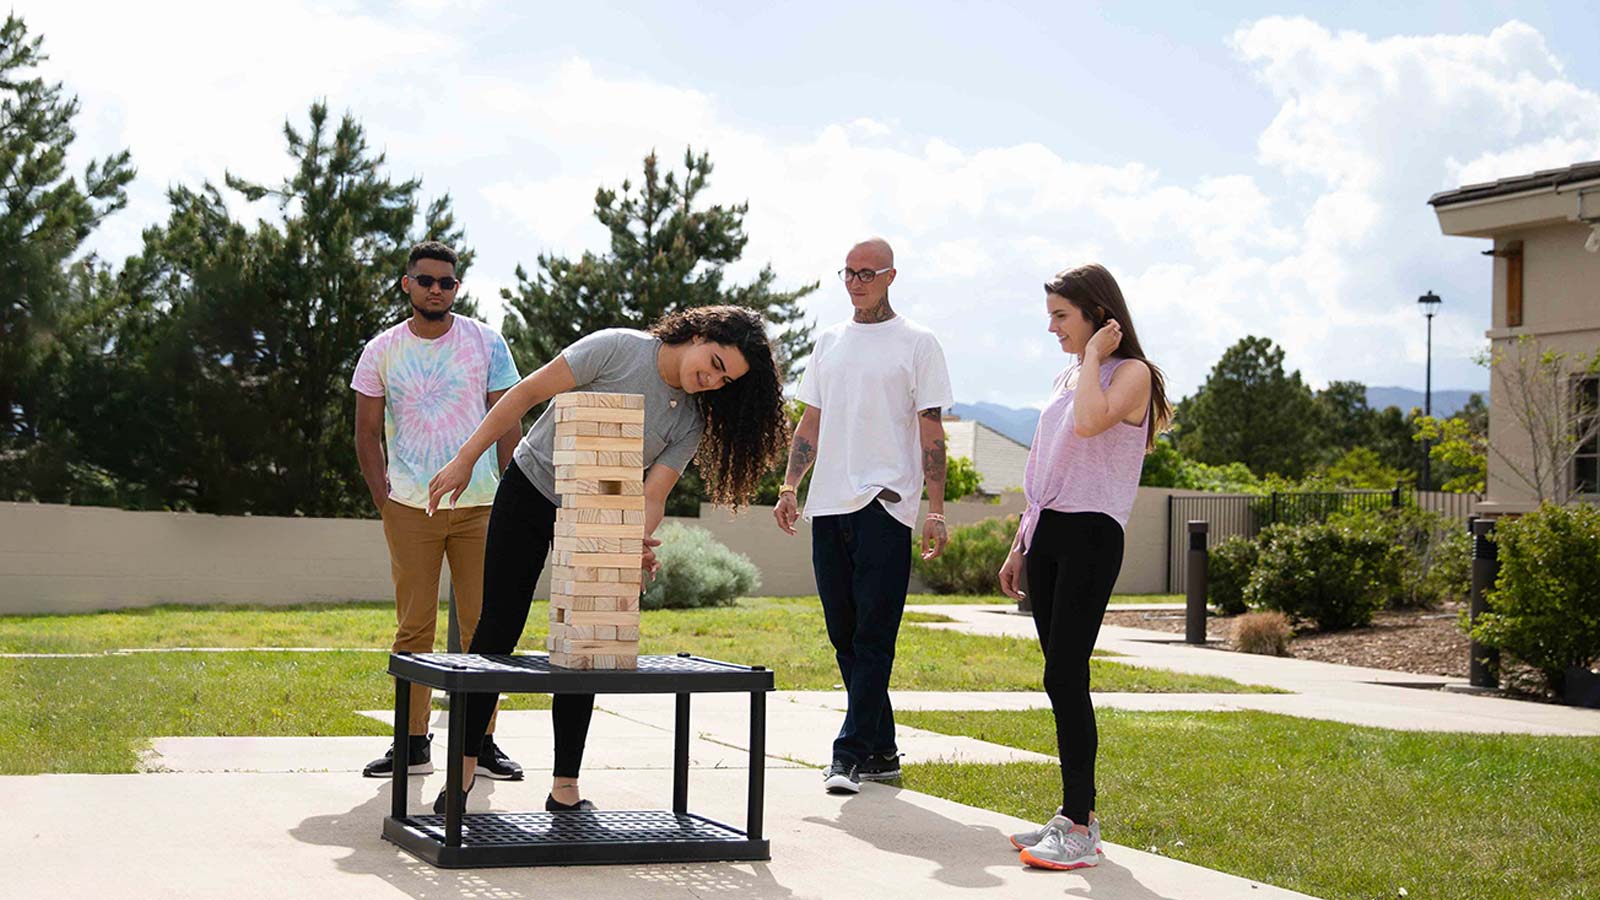 Four people, two men and two women, are playing a giant game of Jenga outside on a sunny day.